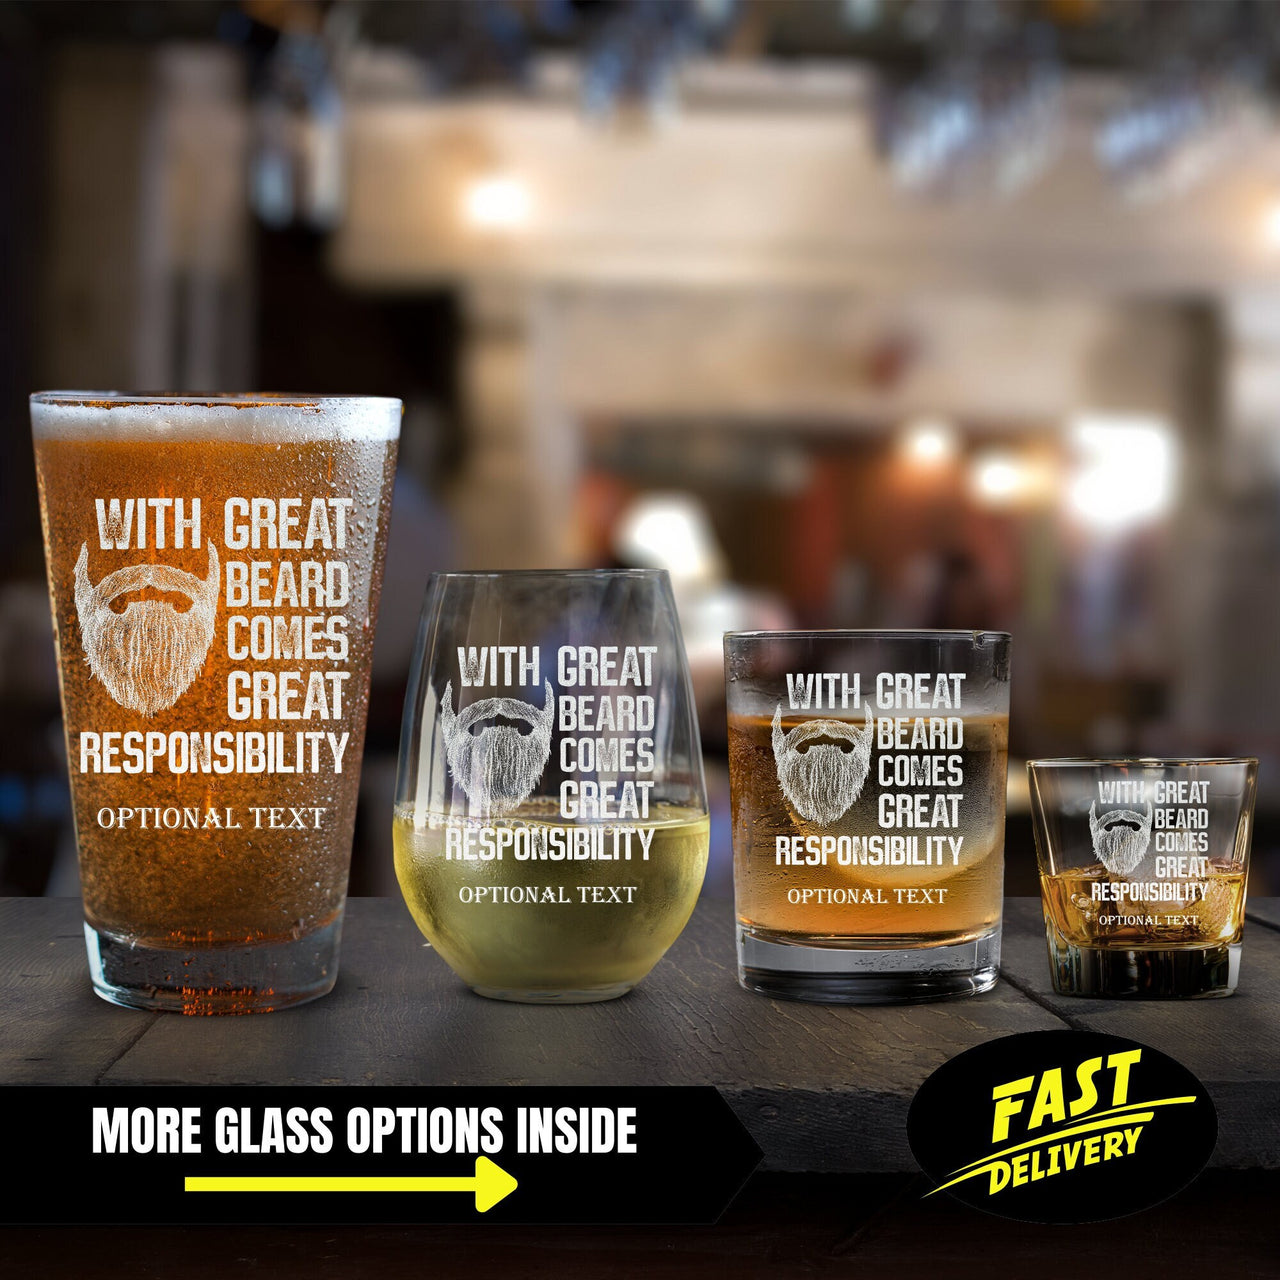 With Great Bear Comes With Great Responsibility Drinkware, Personalized Beer Glass, Funny Whiskey Glass for Men with Beard, Shot Glass Gift